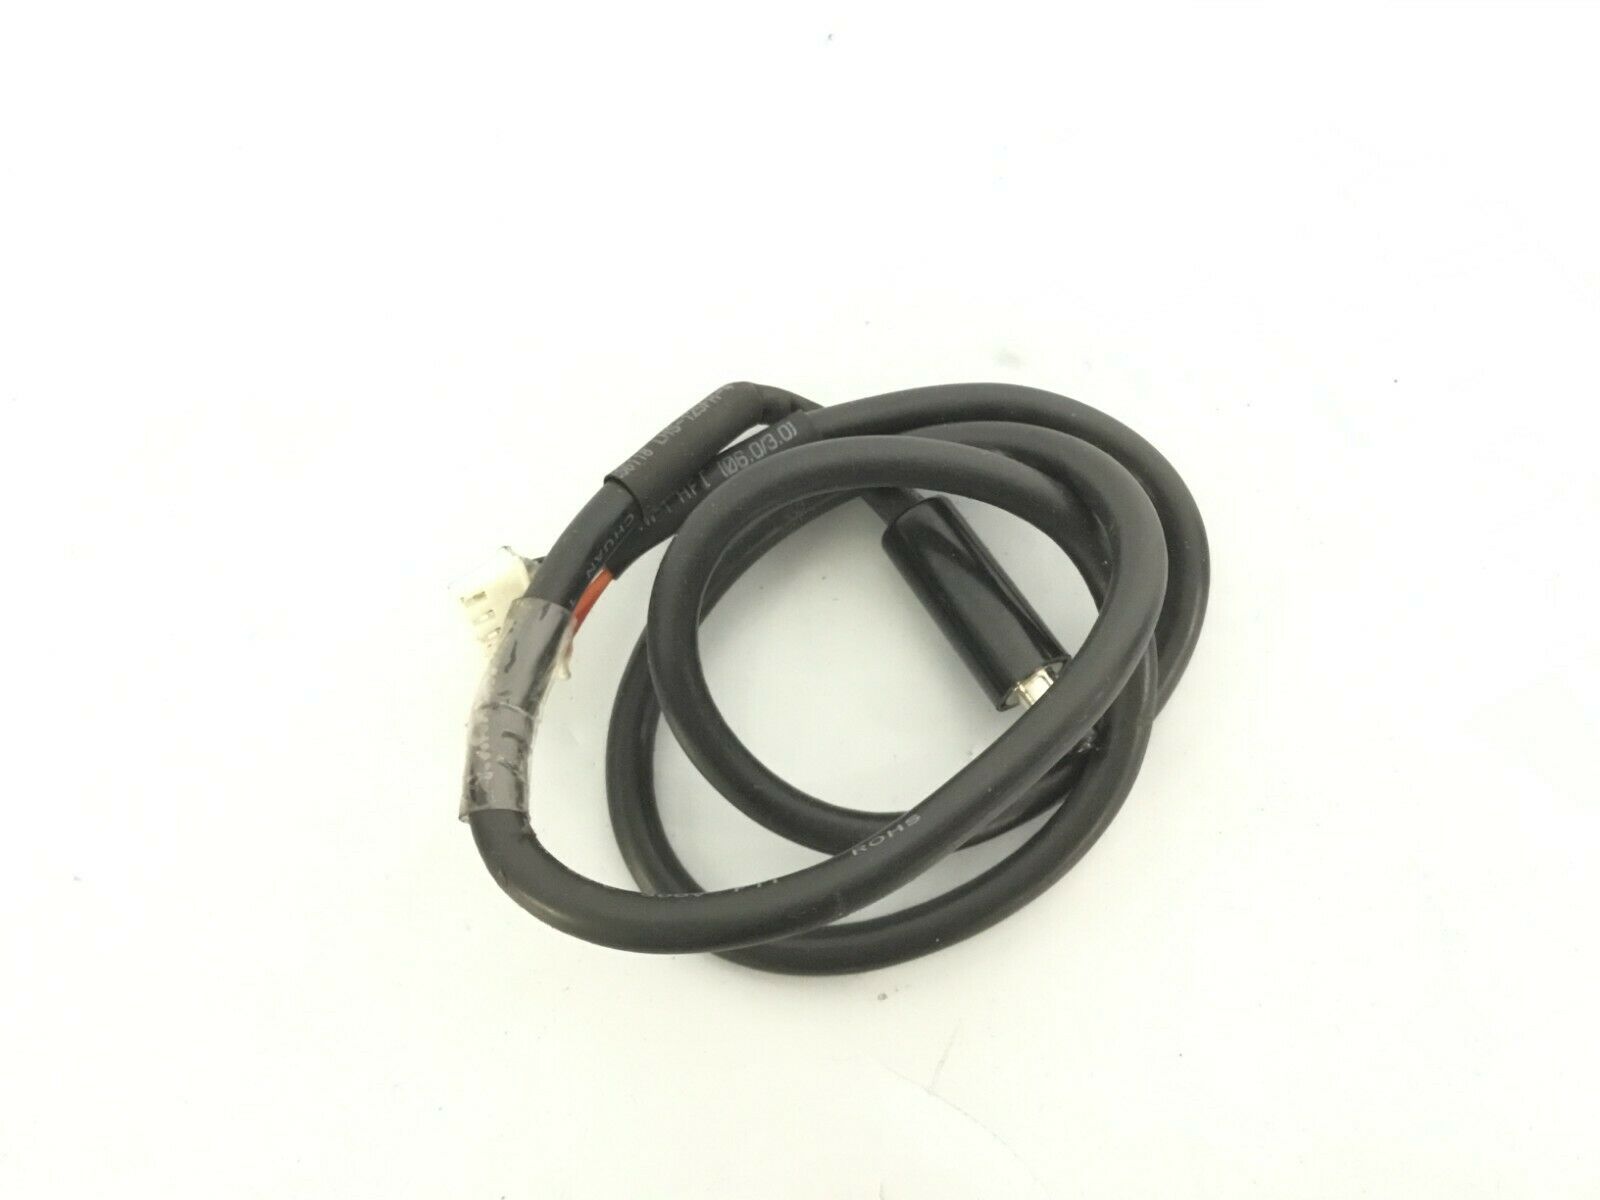 True Fitness TCS550-2 Treadmill Power Cable Wire Harness XL-1054 (Used)